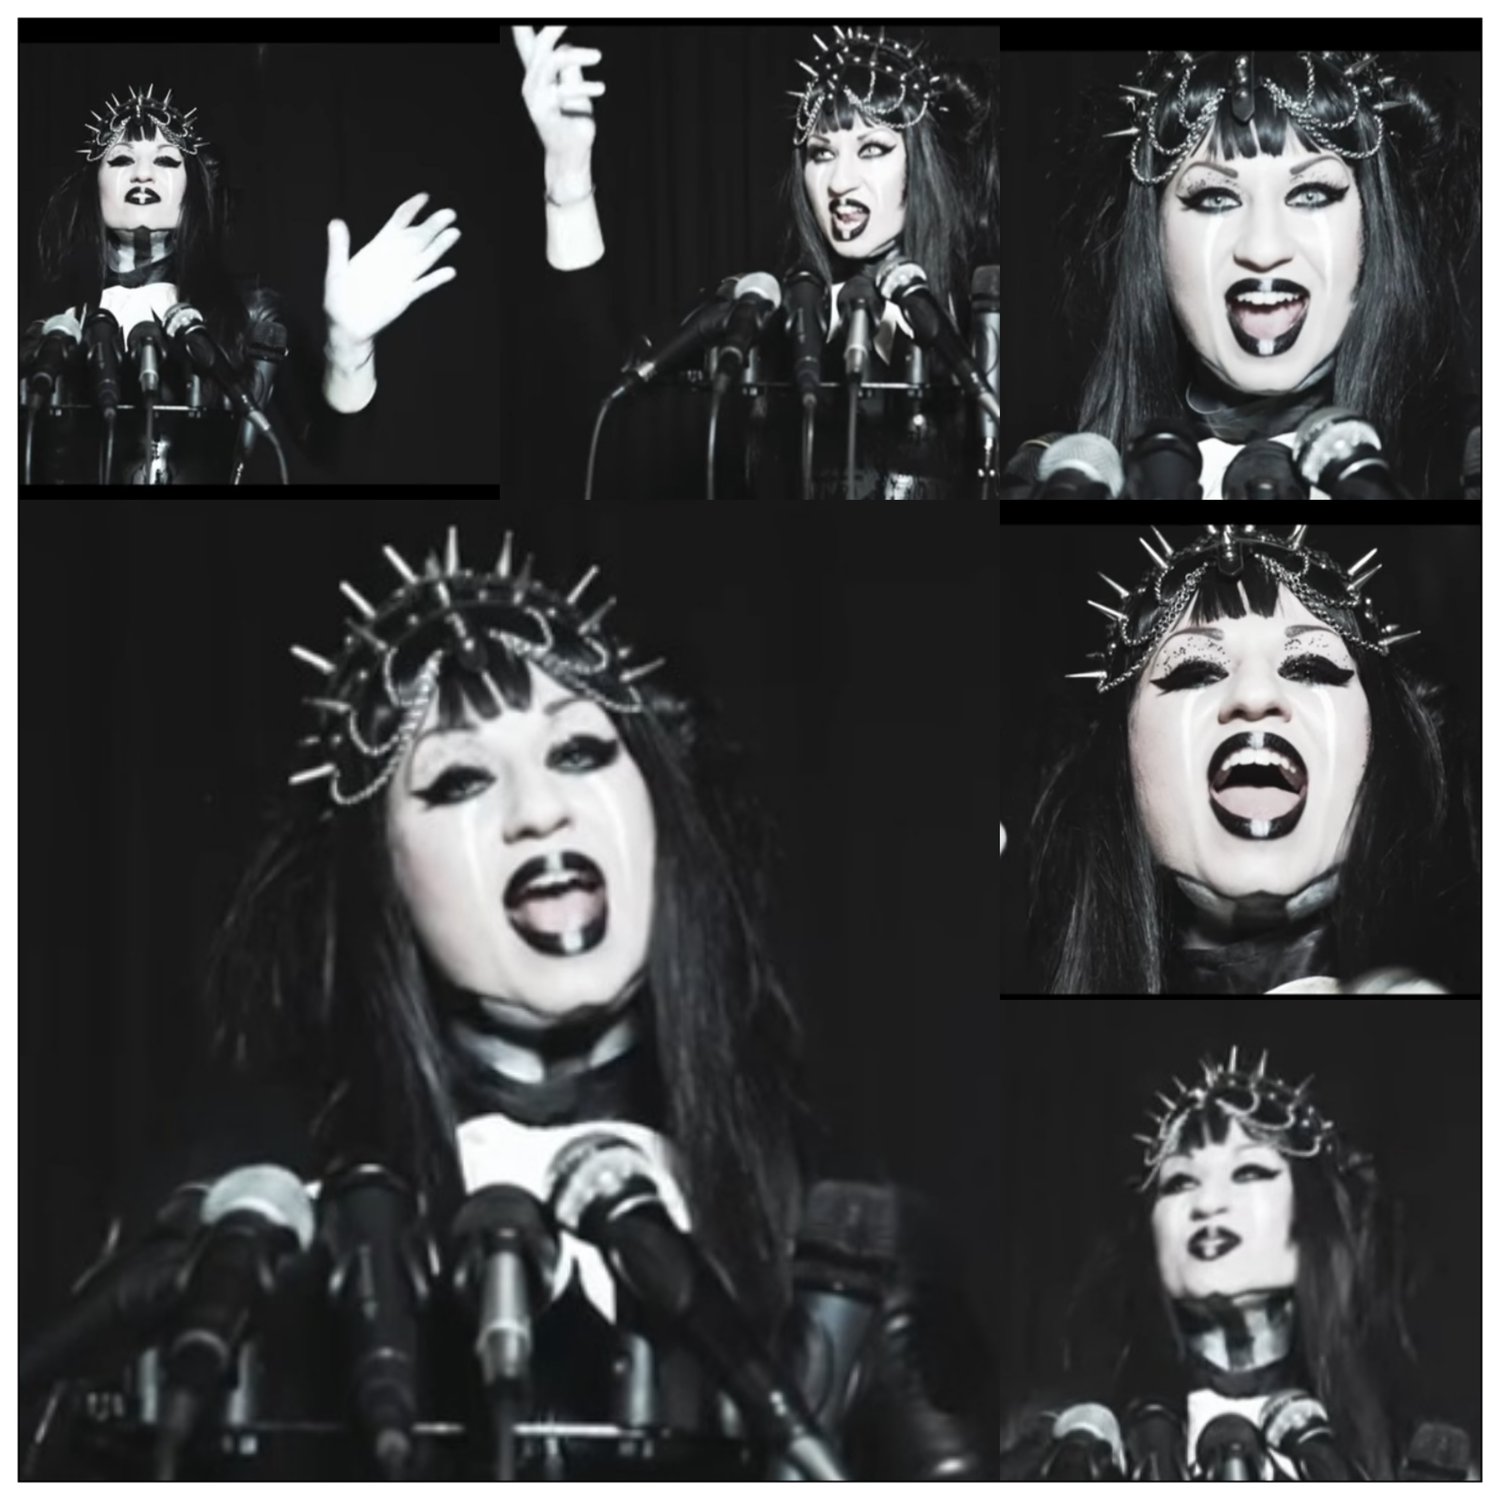 Image of Custom crown worn in the "Thrill of the Kill" music video